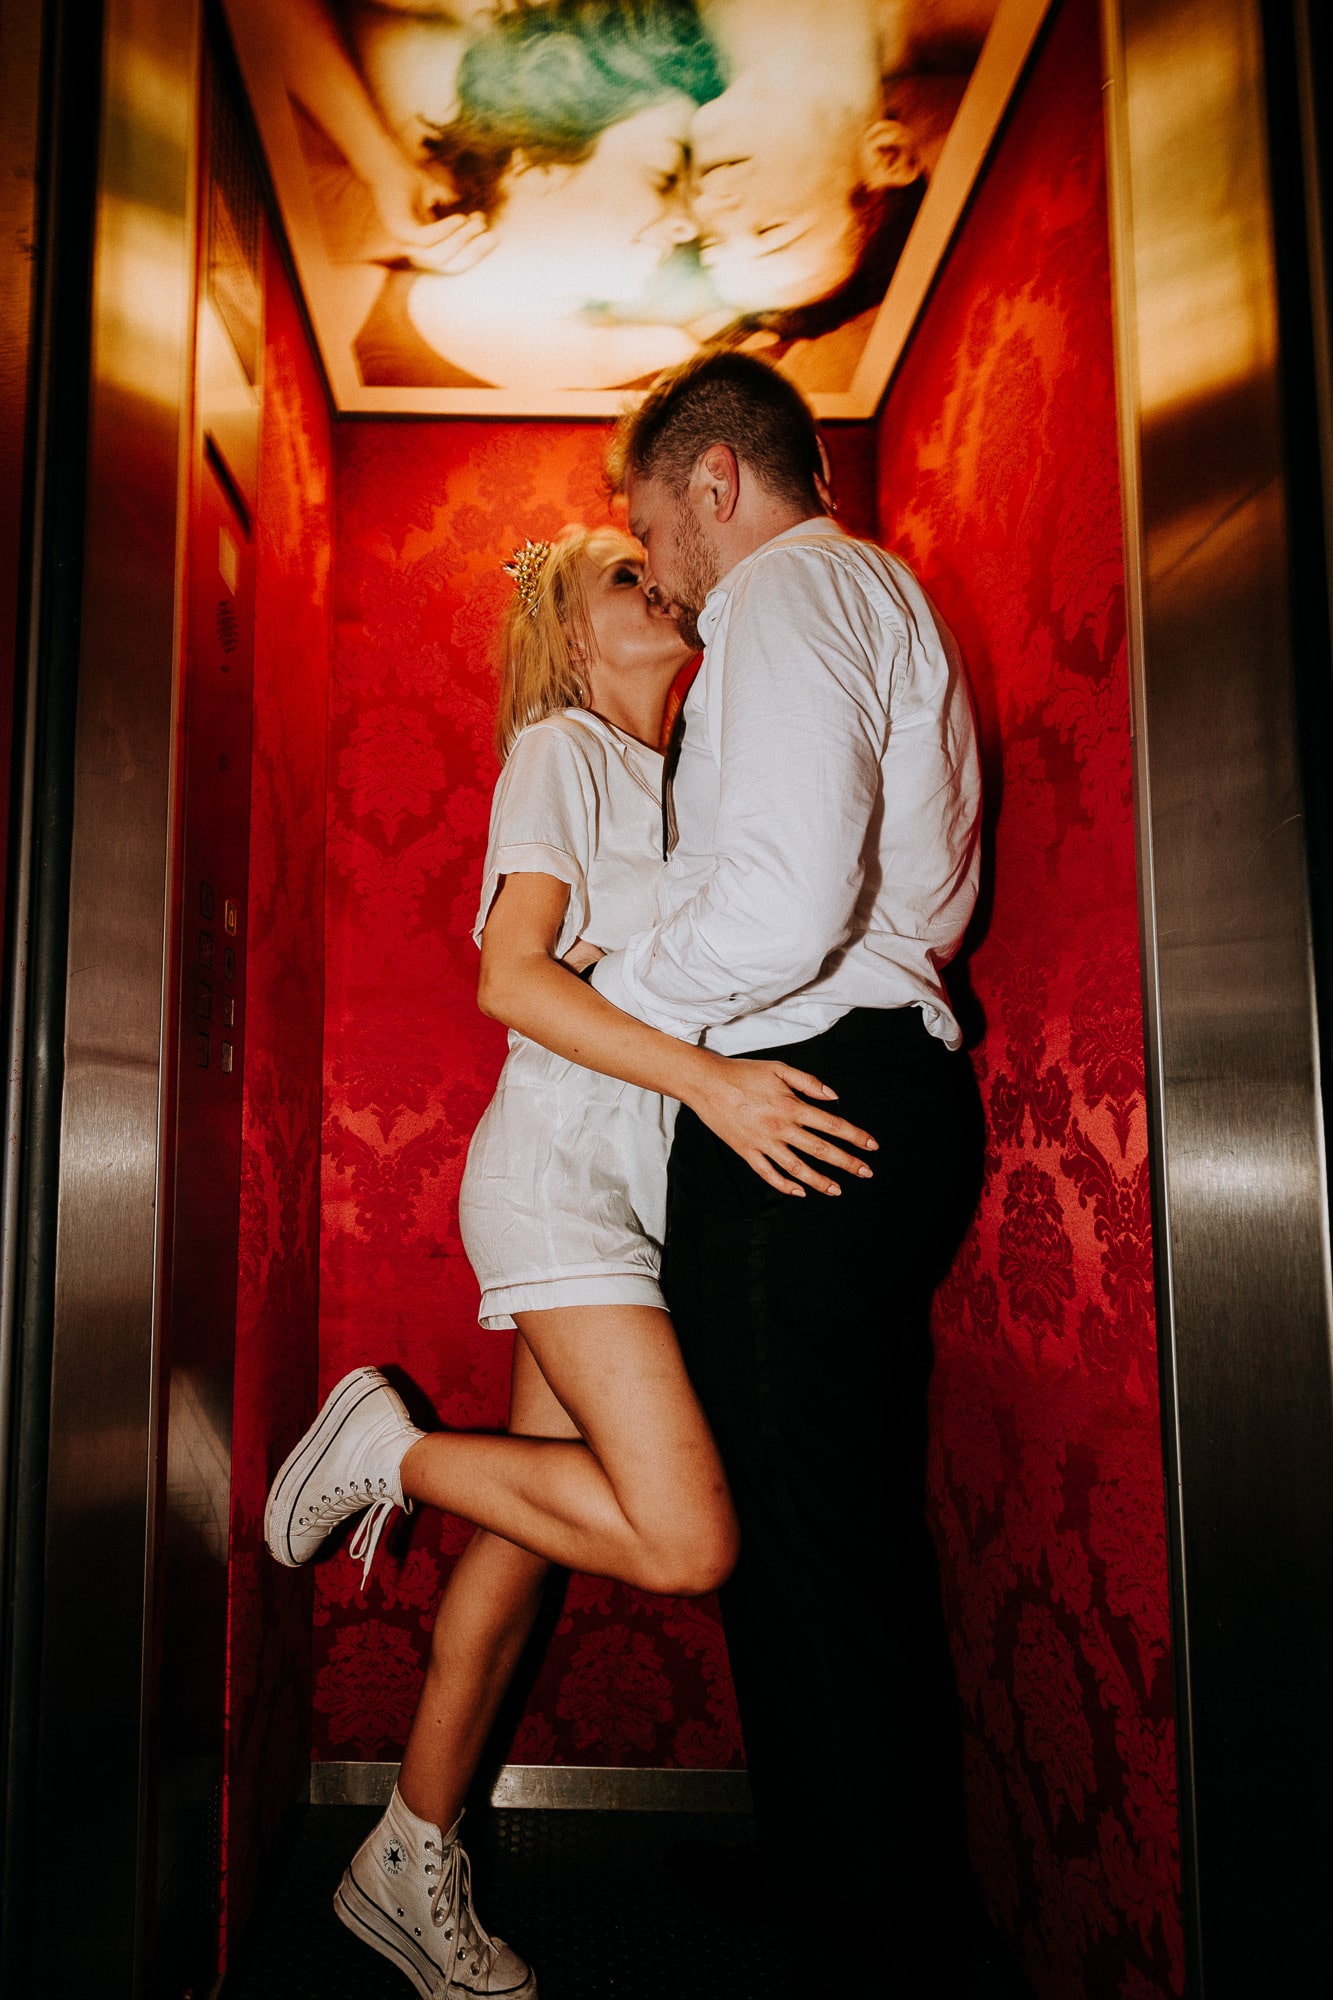 the bride and groom passionately kiss in the lift at the end of their wedding party